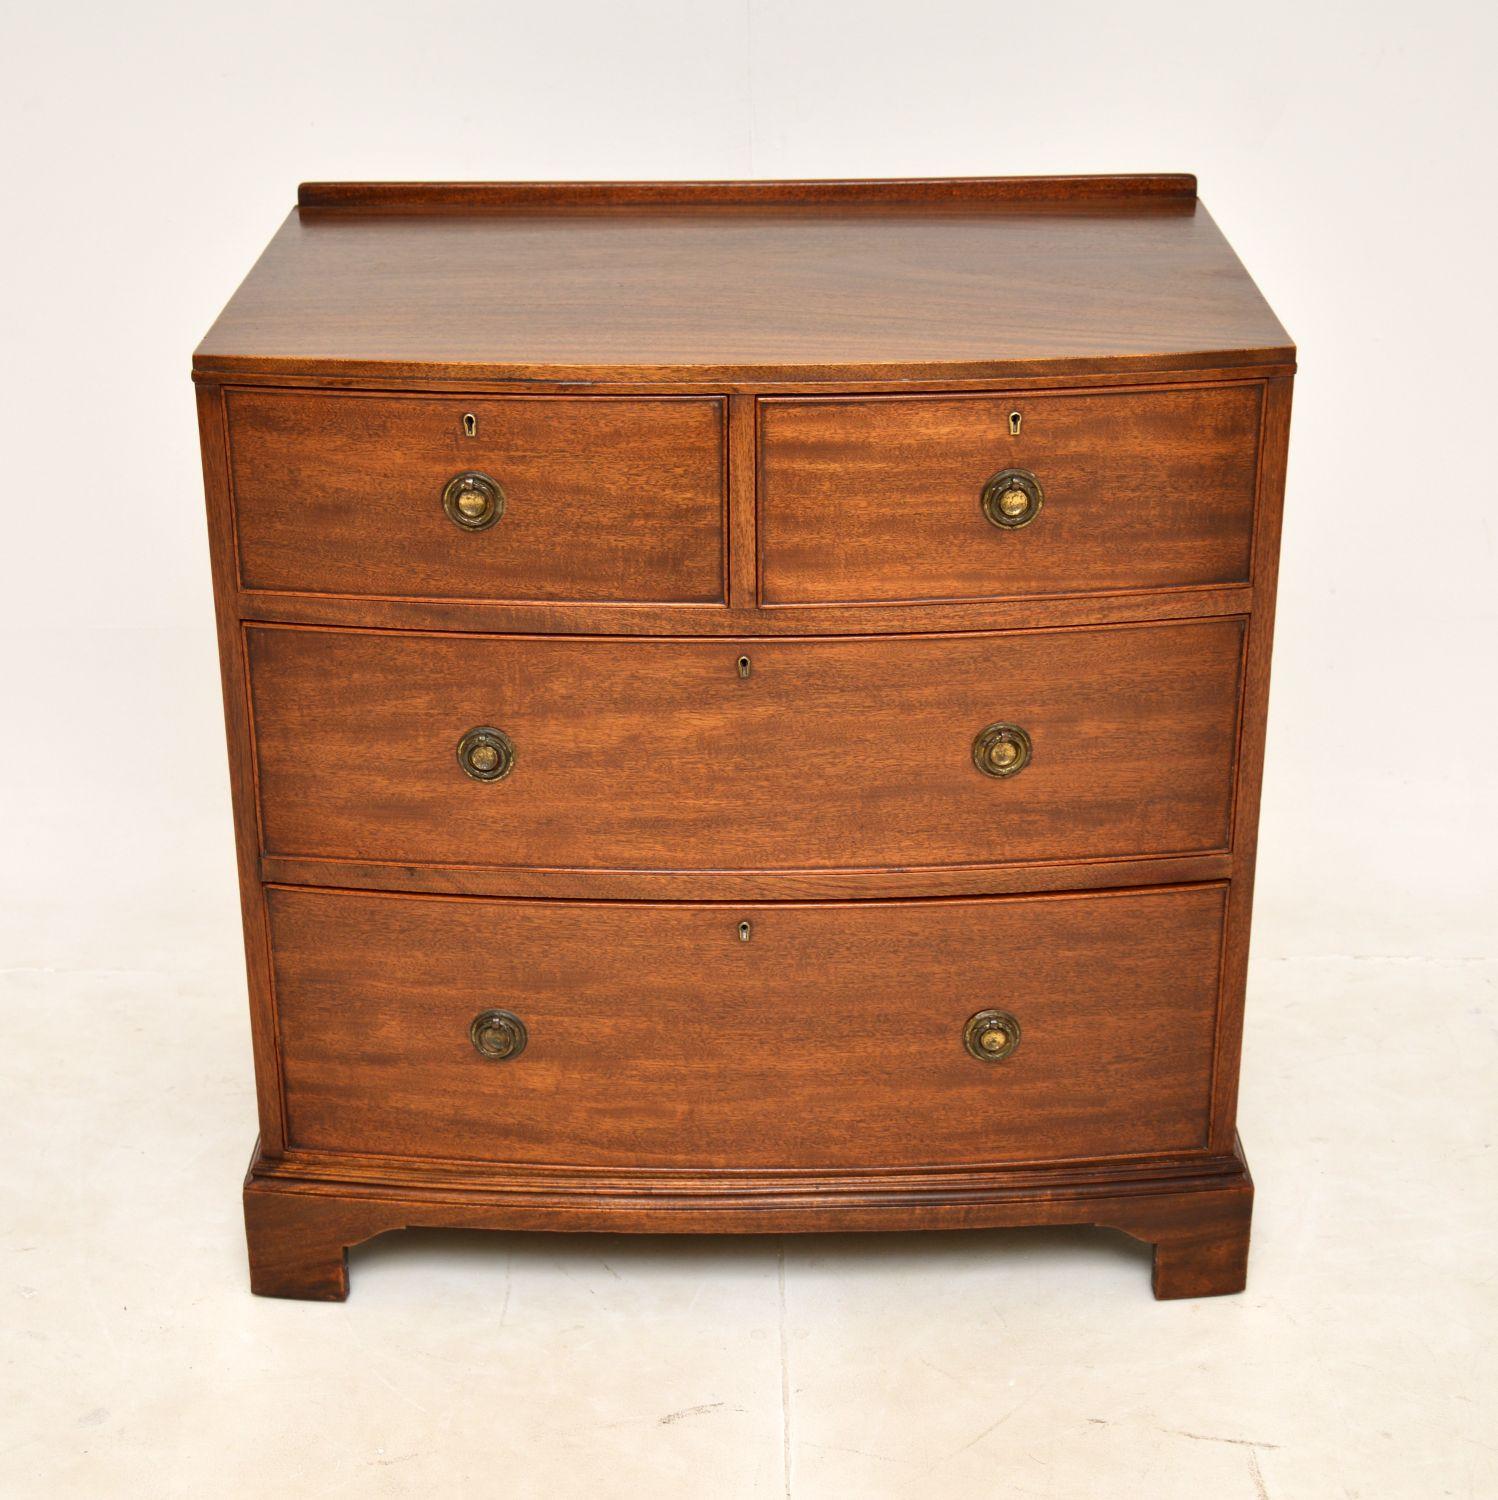 A smart and extremely well made antique chest of drawers. It was made in England by Maple & Co, it dates from around the 1900-1910 period.

The quality is outstanding, this has plenty of storage space and is a very sturdy piece. The wood has a